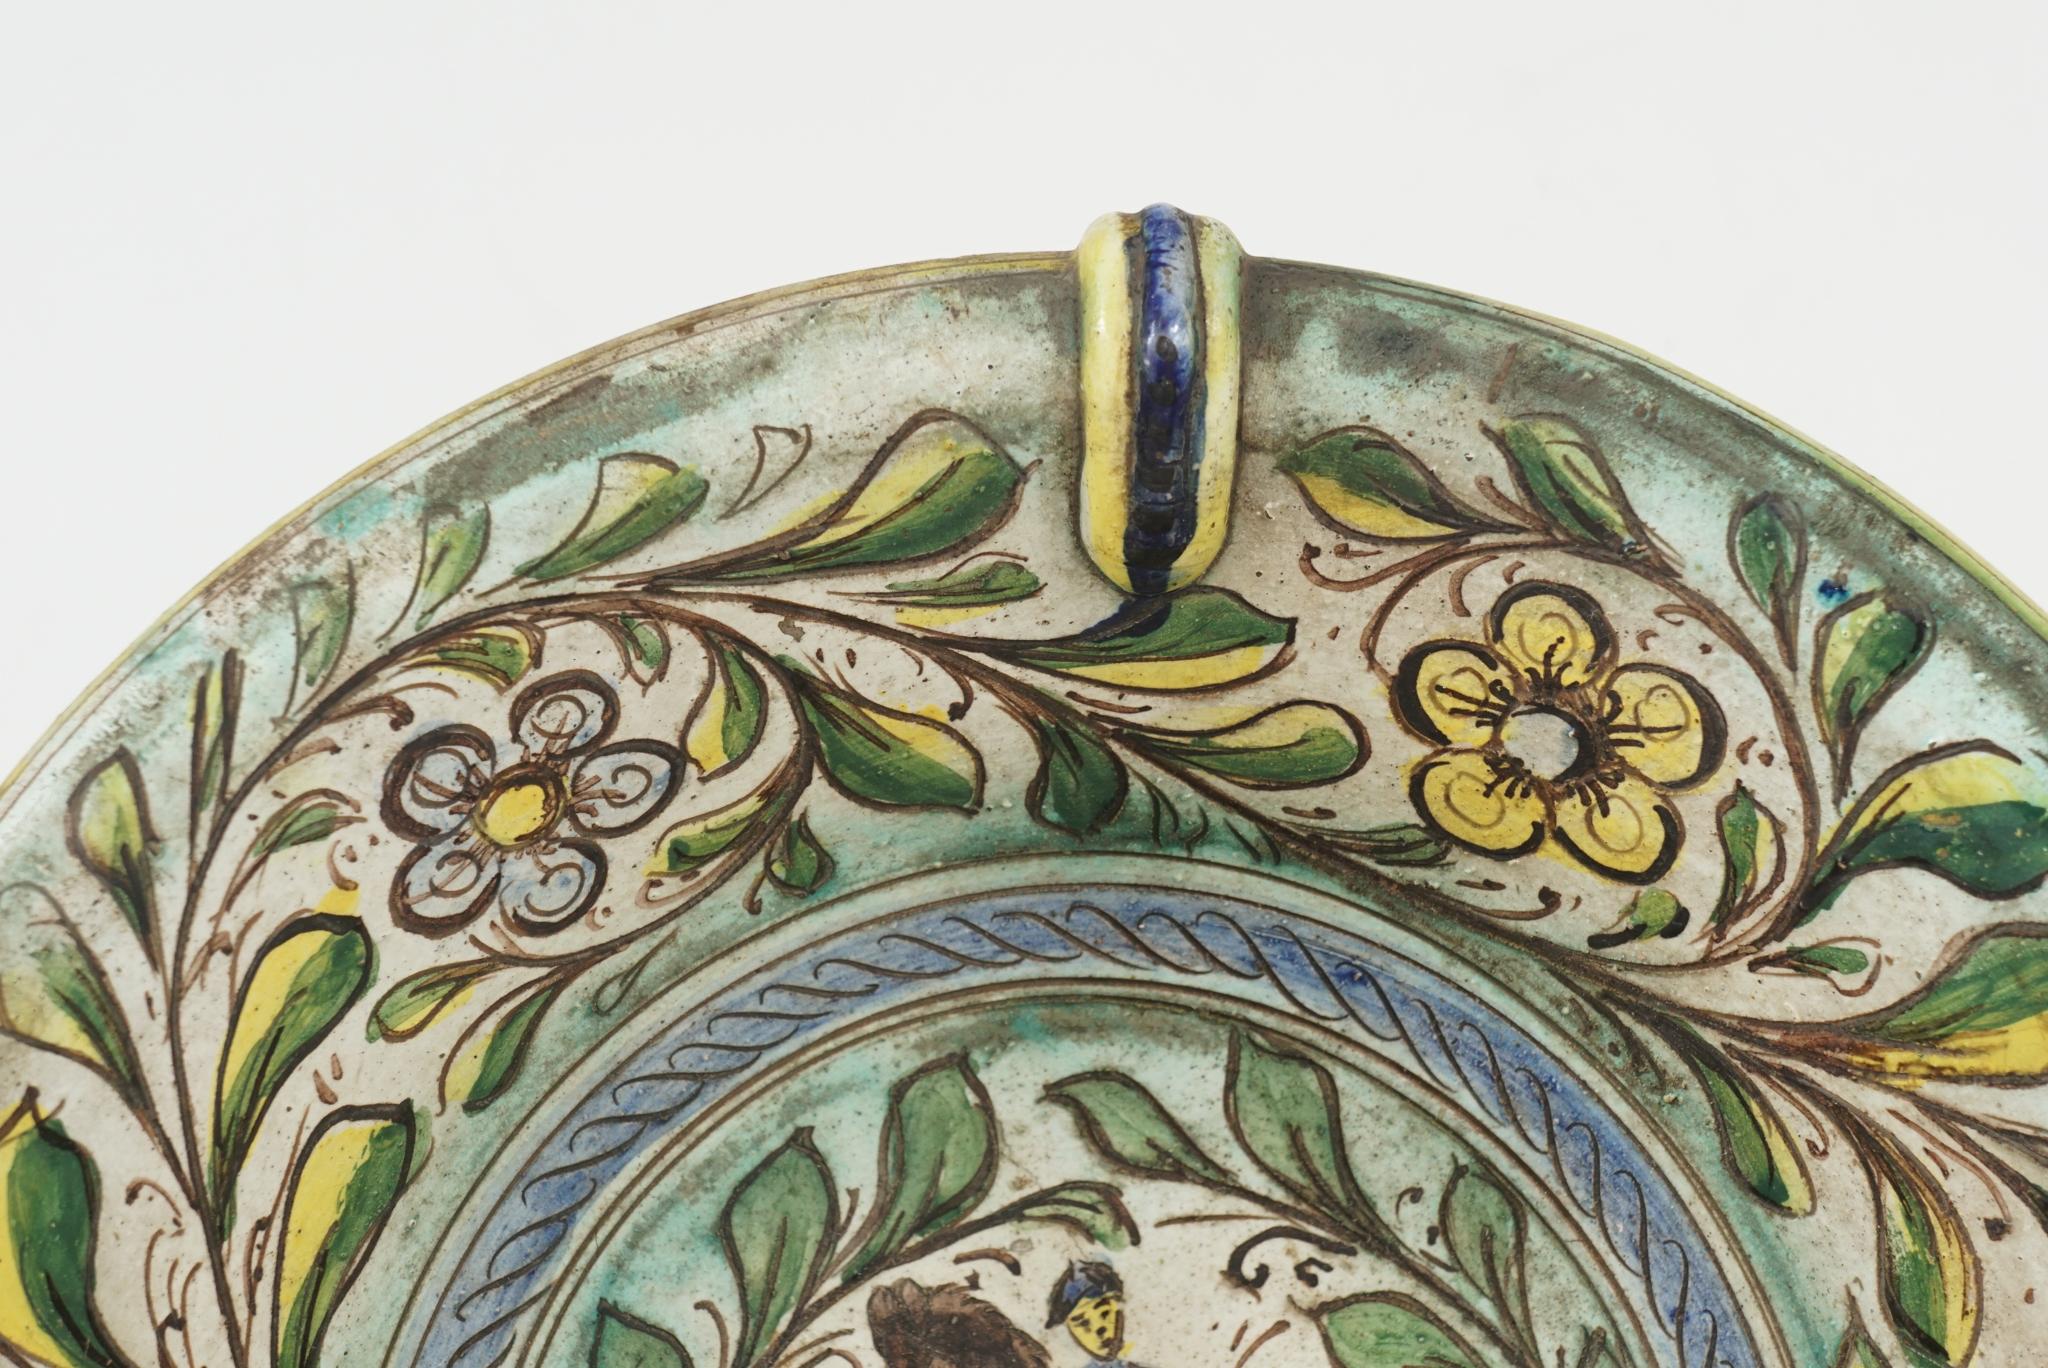 This good sized bowl is a great example of the majolica wares produced in Italy throughout the 15th, 16th, 17, and 18th centuries. Humble and simple but highly decorative and entertaining in nature these pieces are often simply decorated in colors